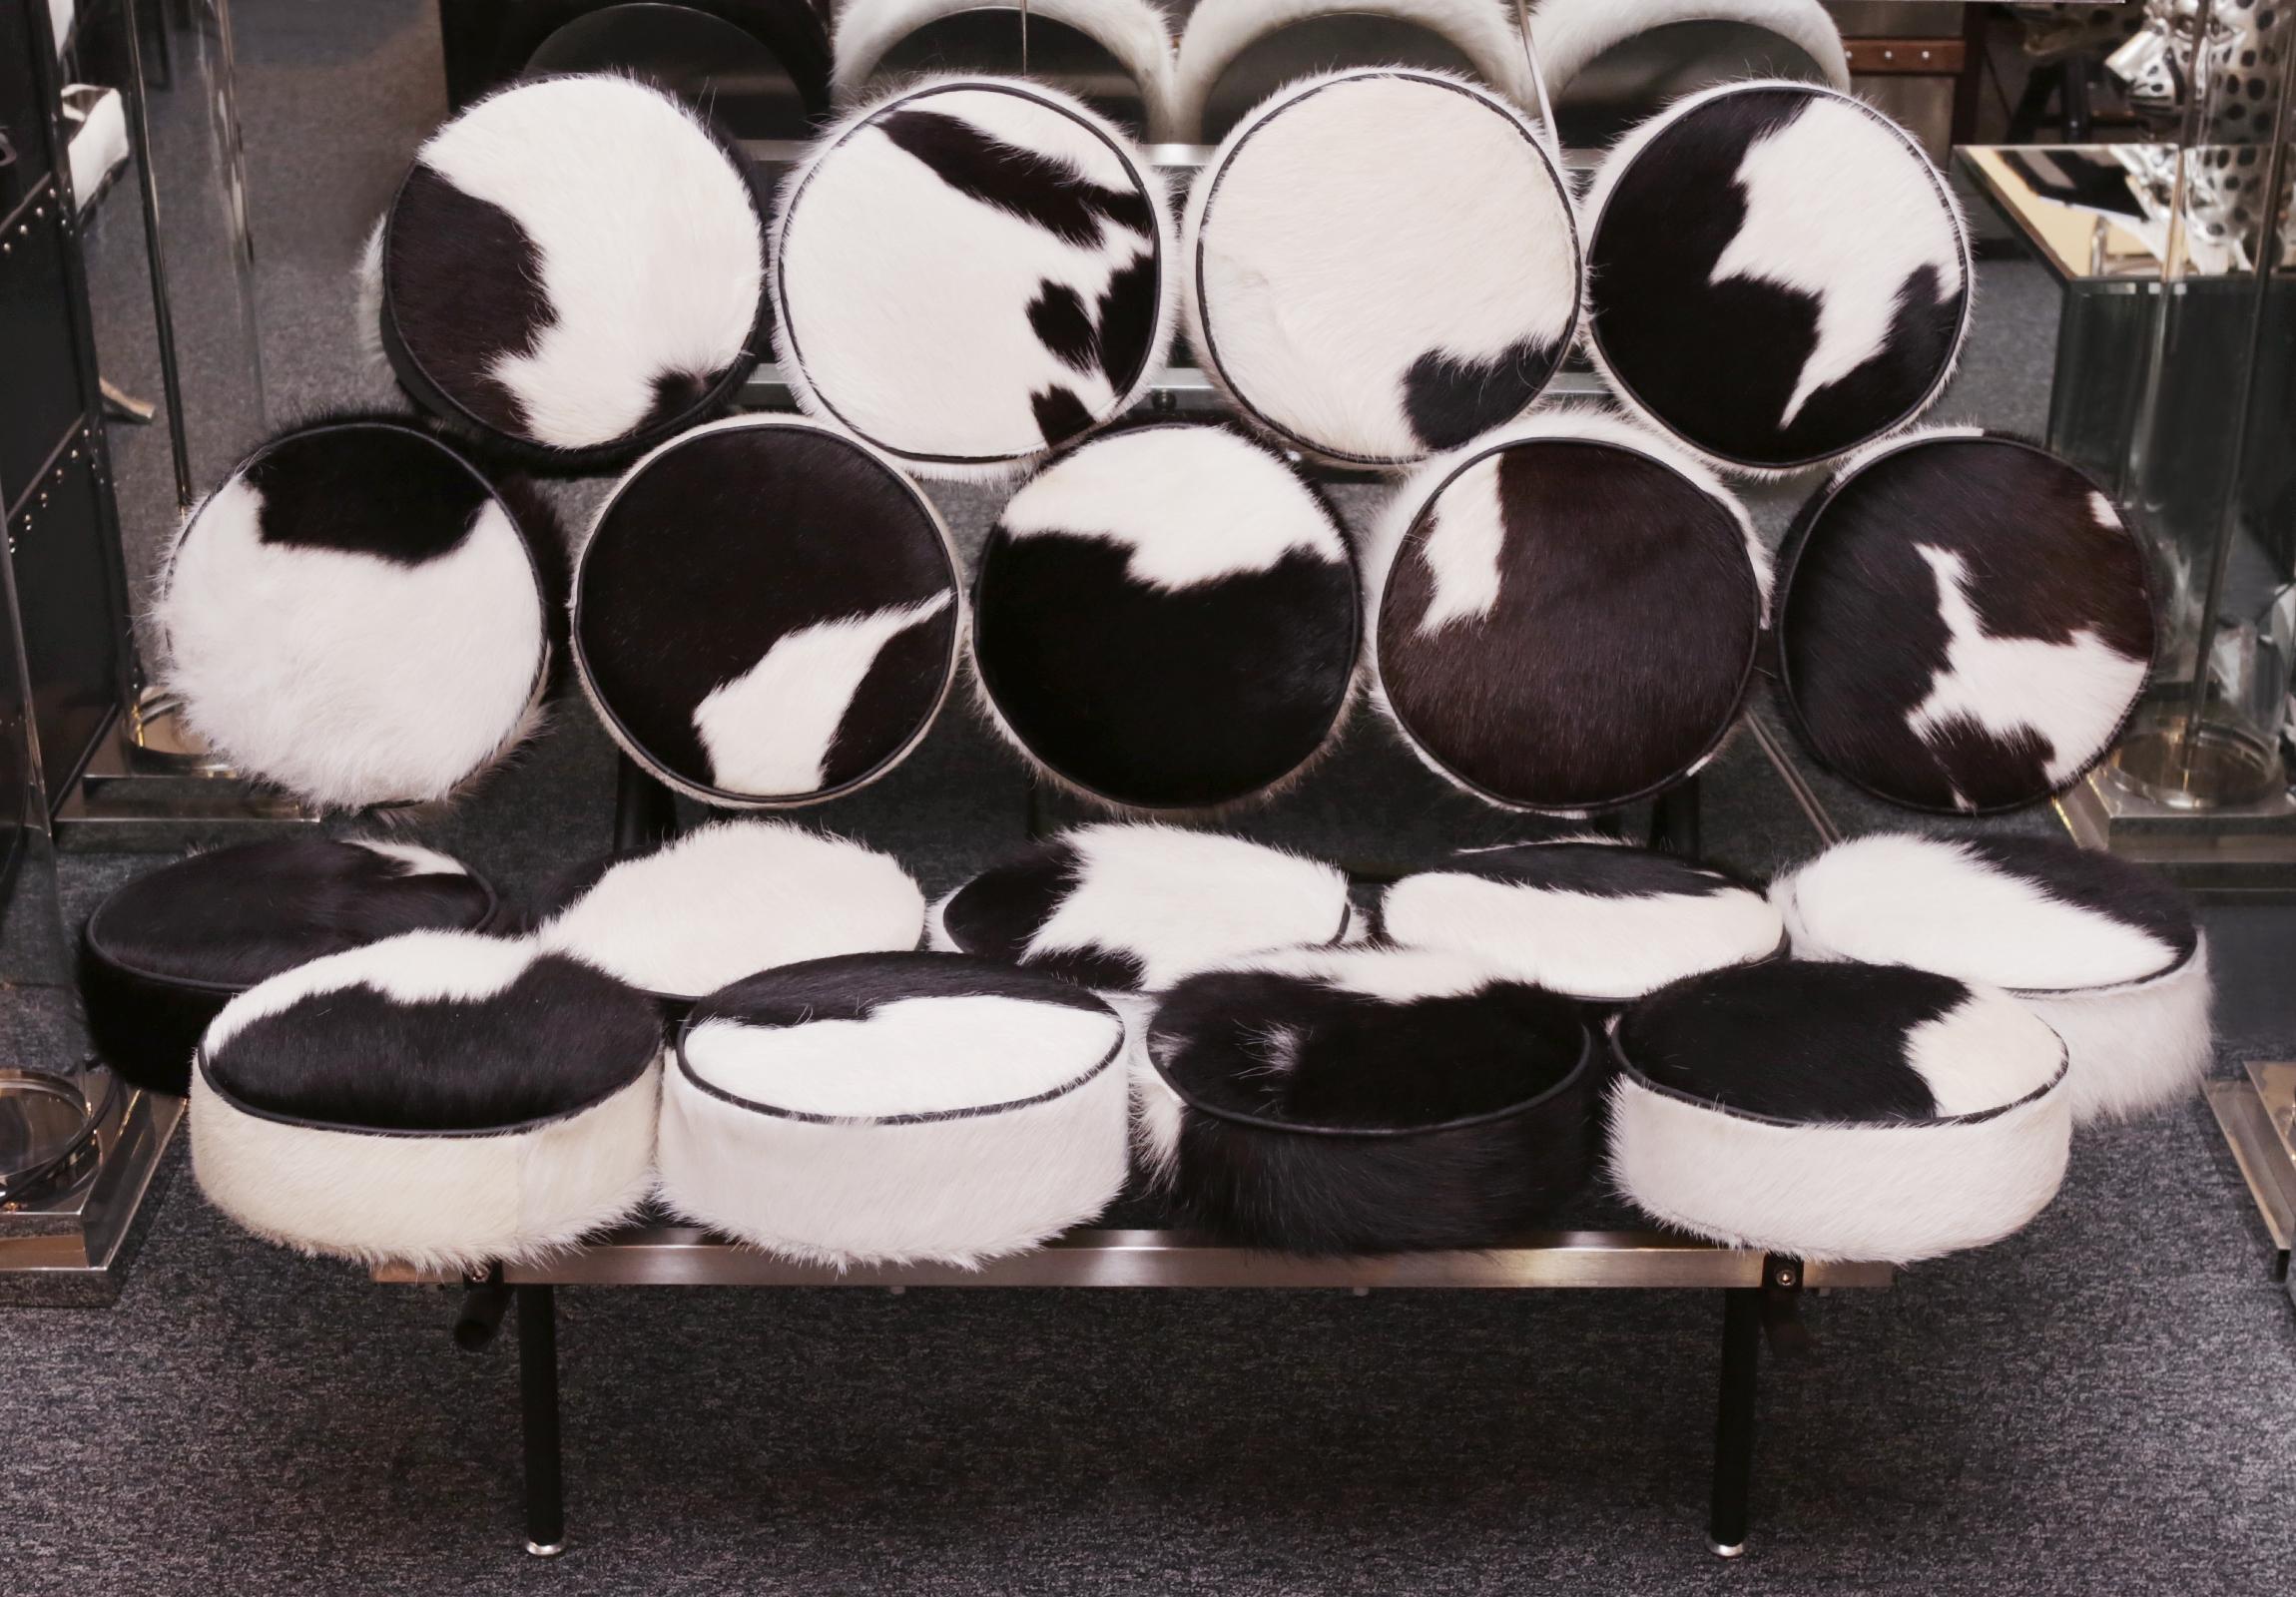 Sofa Marshmallow black and white,
covered with treated natural cowhide,
on polished stainless steel feet.
Exceptional piece.